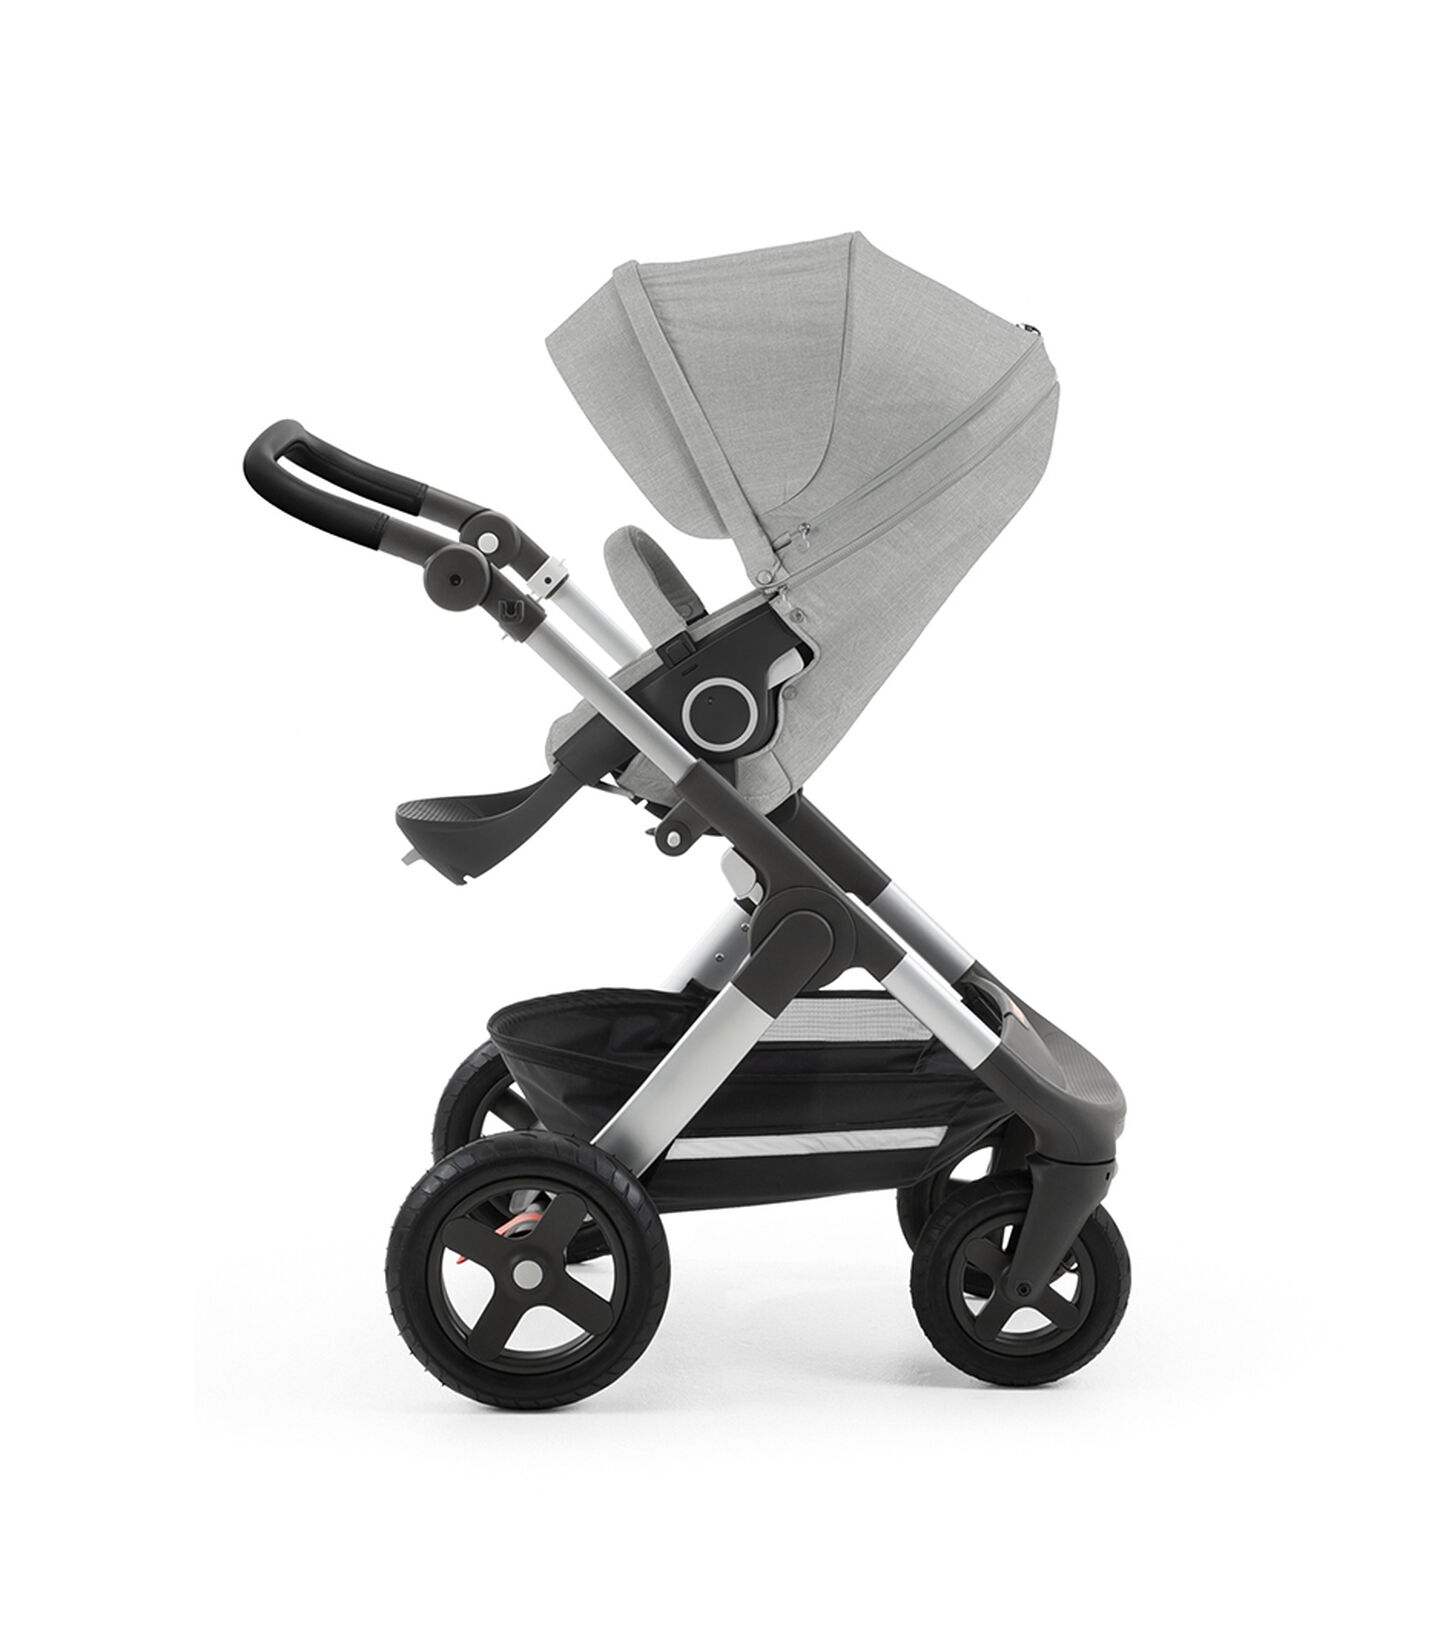 Stokke® Trailz™ with silver chassis and Stokke® Stroller Seat, Grey Melange. Leatherette Handle. Terrain Wheels. view 1